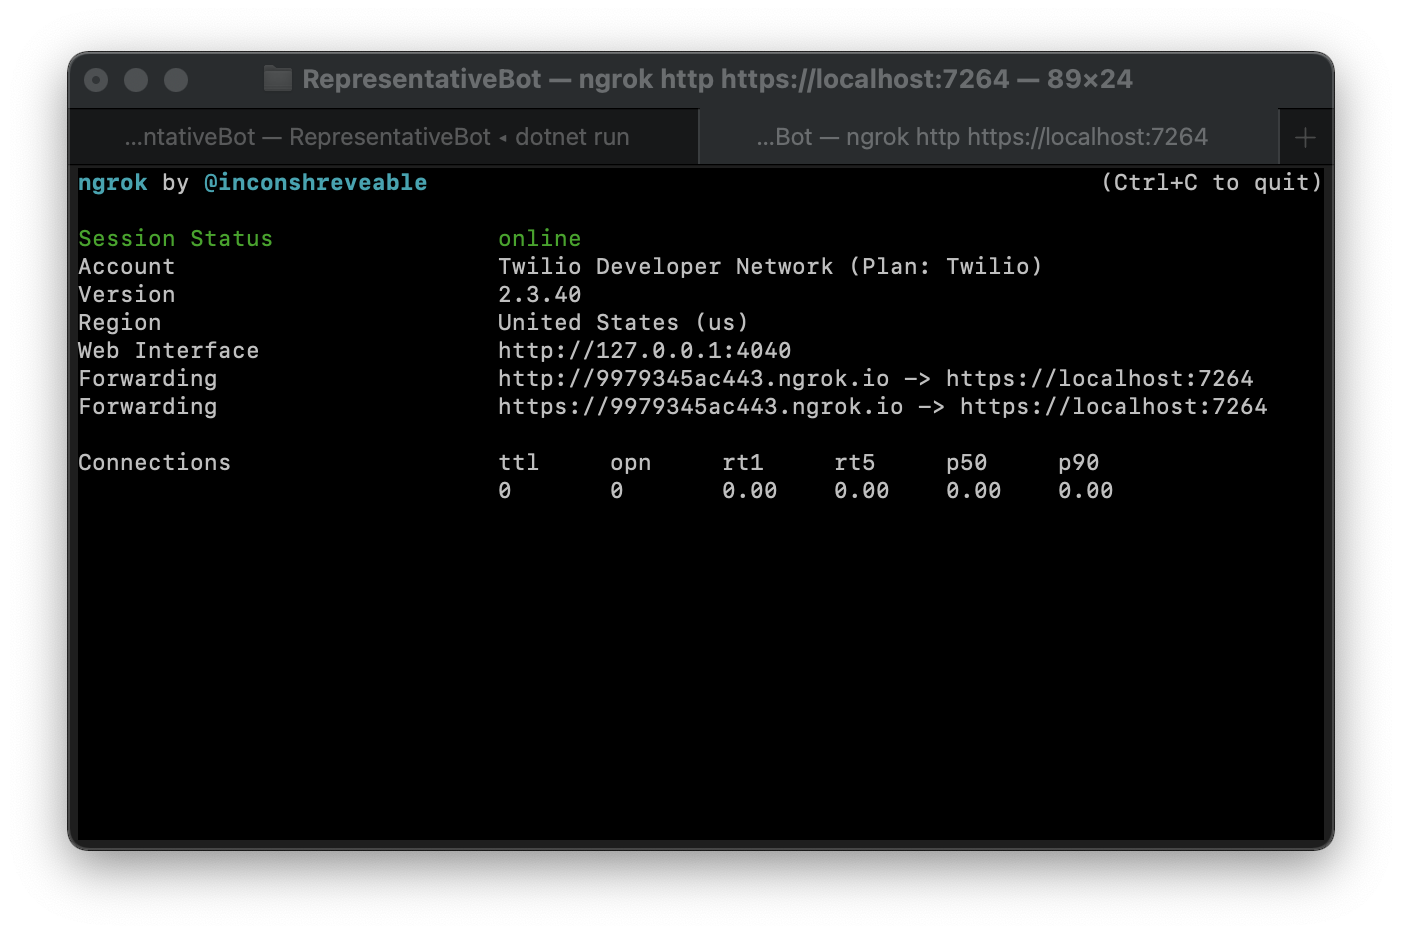 ngrok http command output showing information about the secure tunnel, most importantly the public forwarding URLs